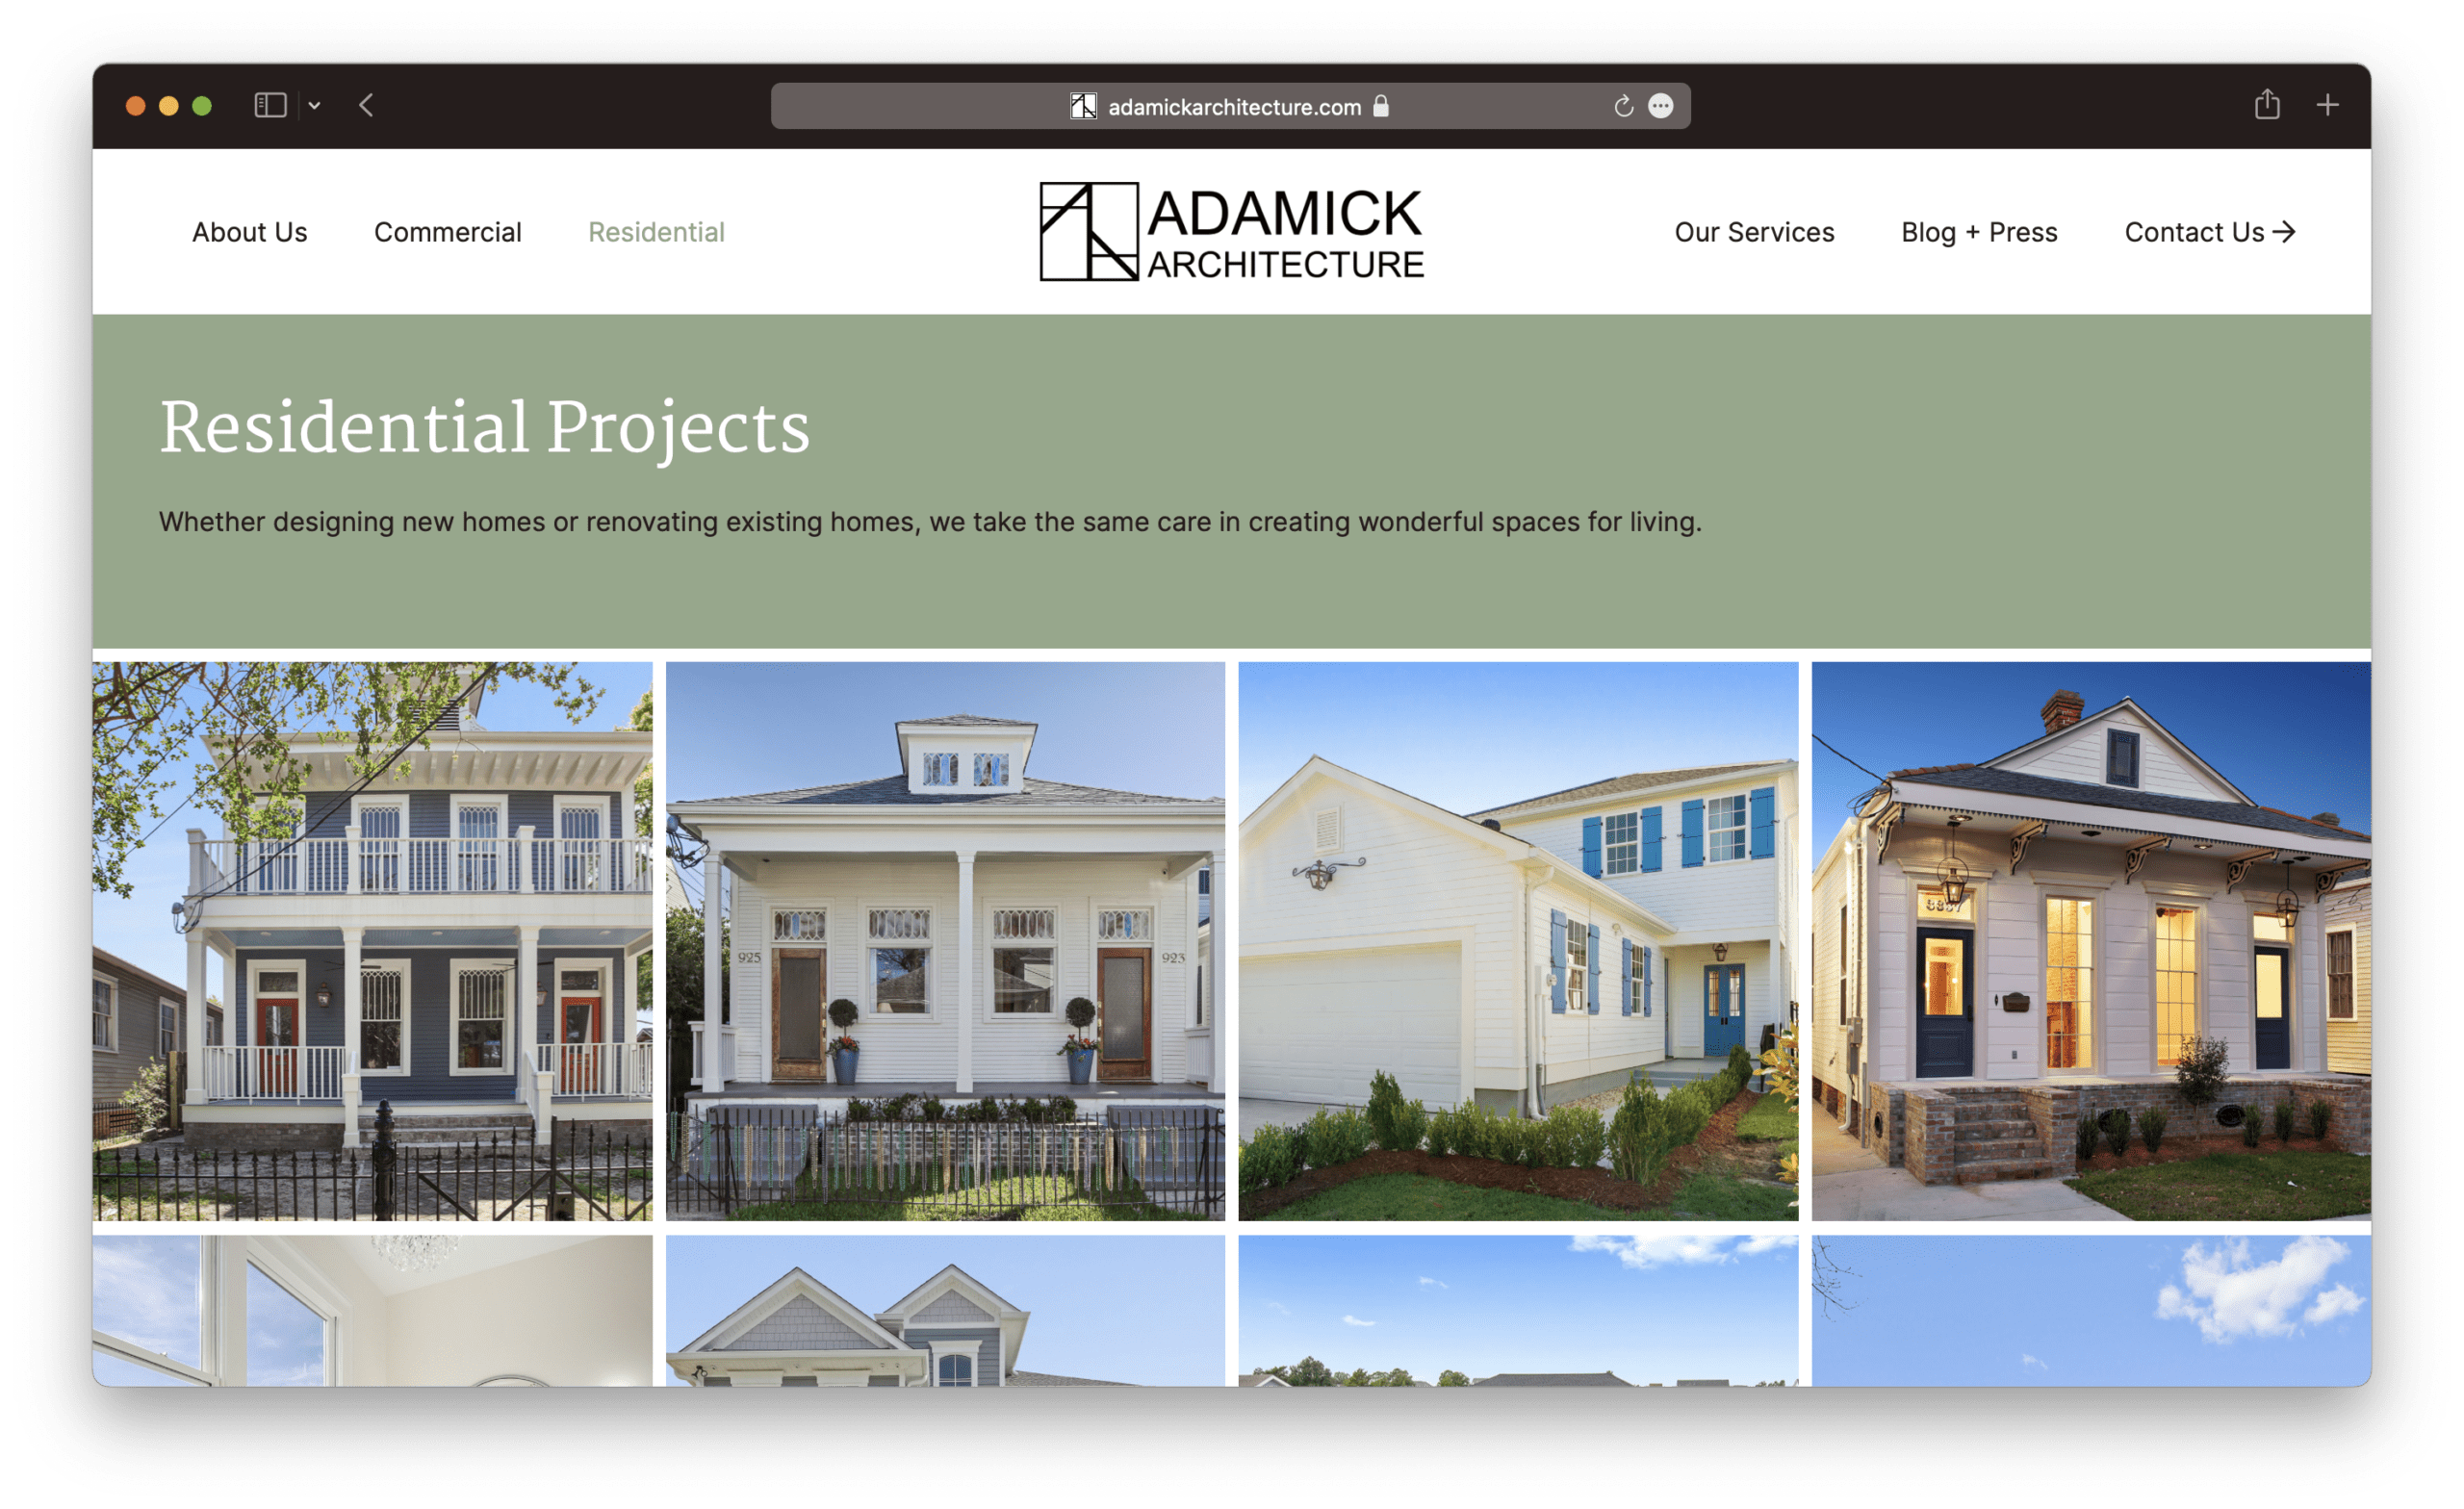 Residential Projects page on Adamick Architecture's website